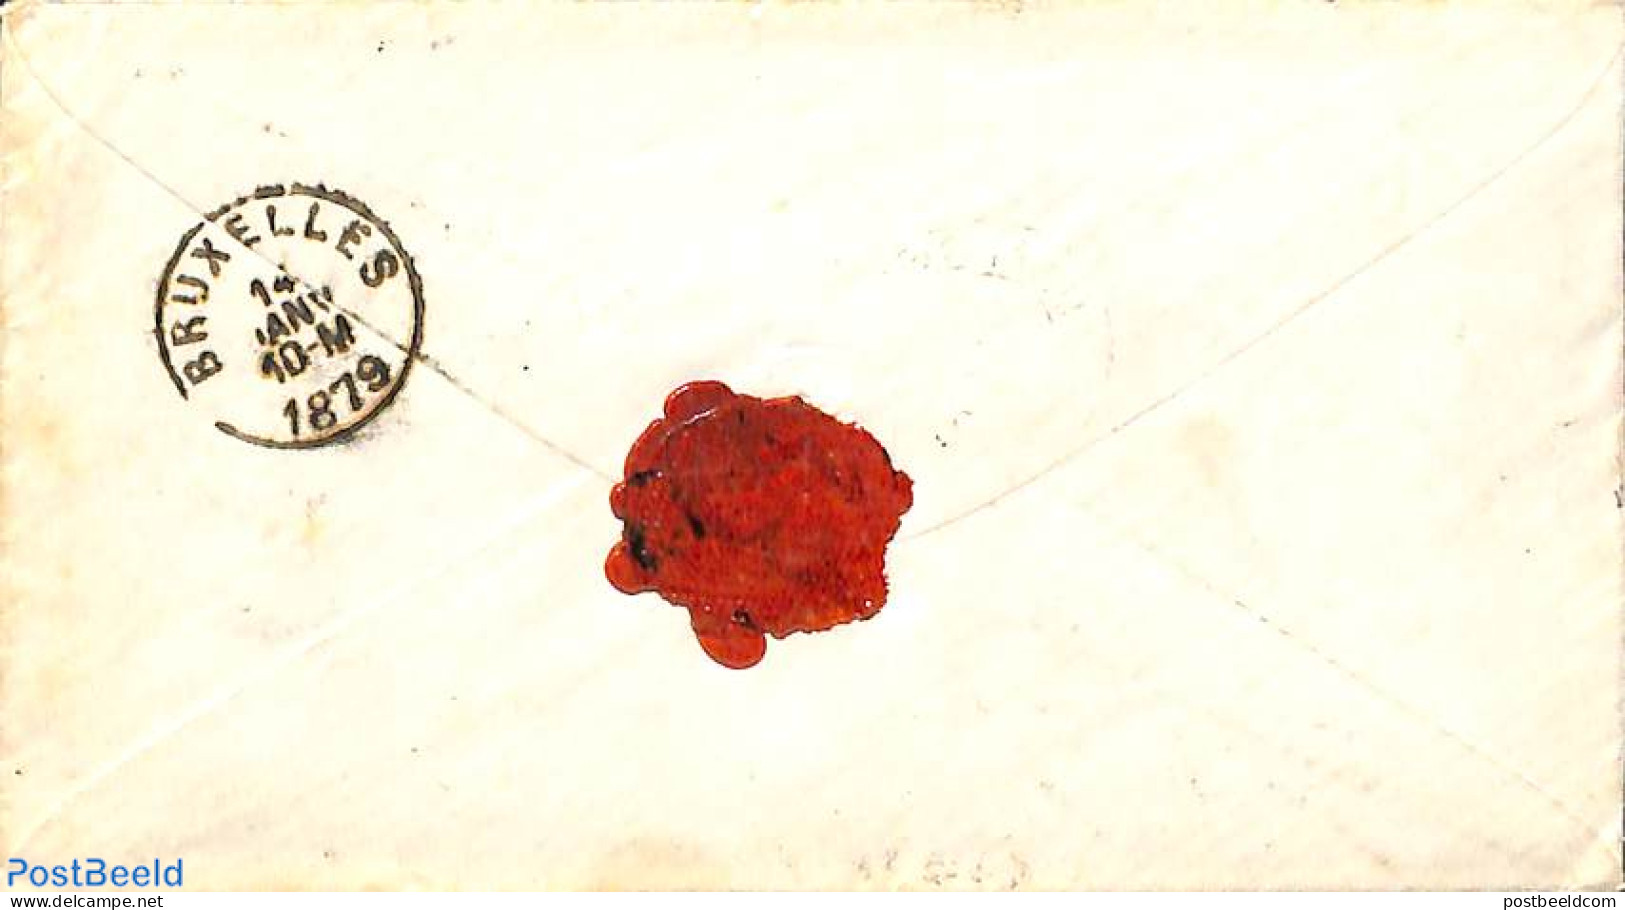 Netherlands 1879 Small Envelope From Maarsen To Brussels, See Both Postmarks. , Postal History - Covers & Documents